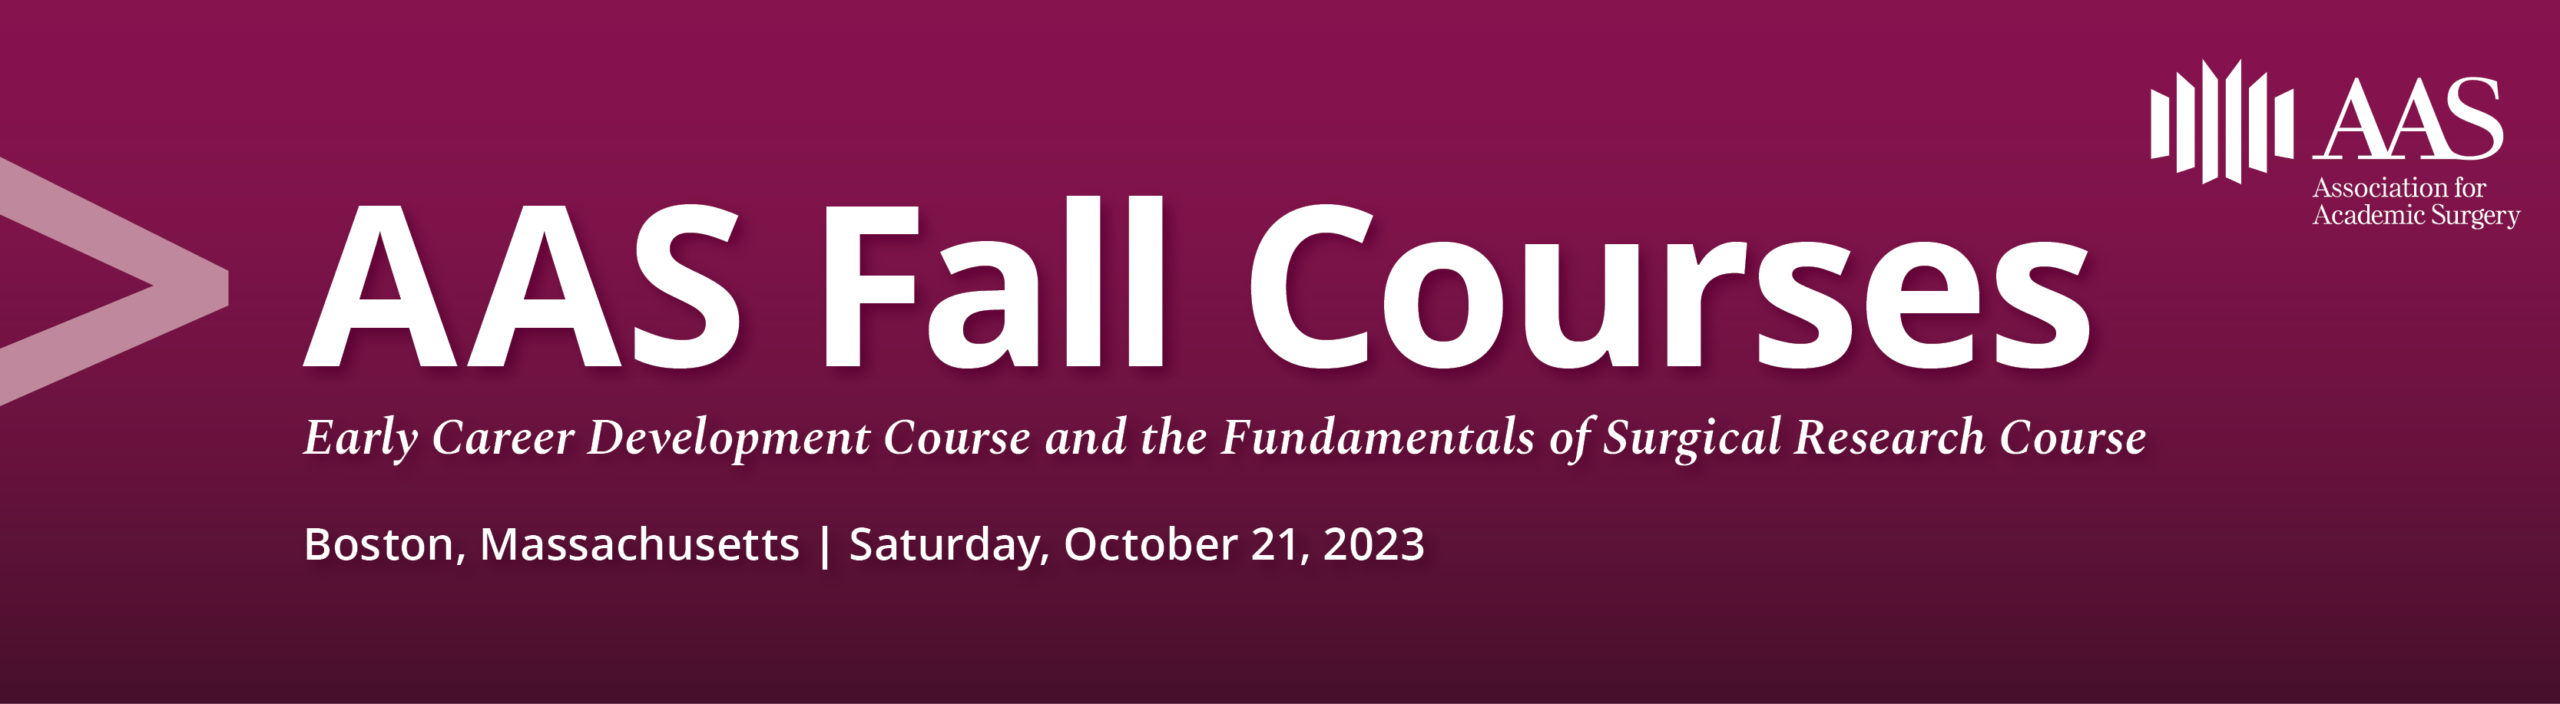 Fall Courses Association for Academic Surgery (AAS)